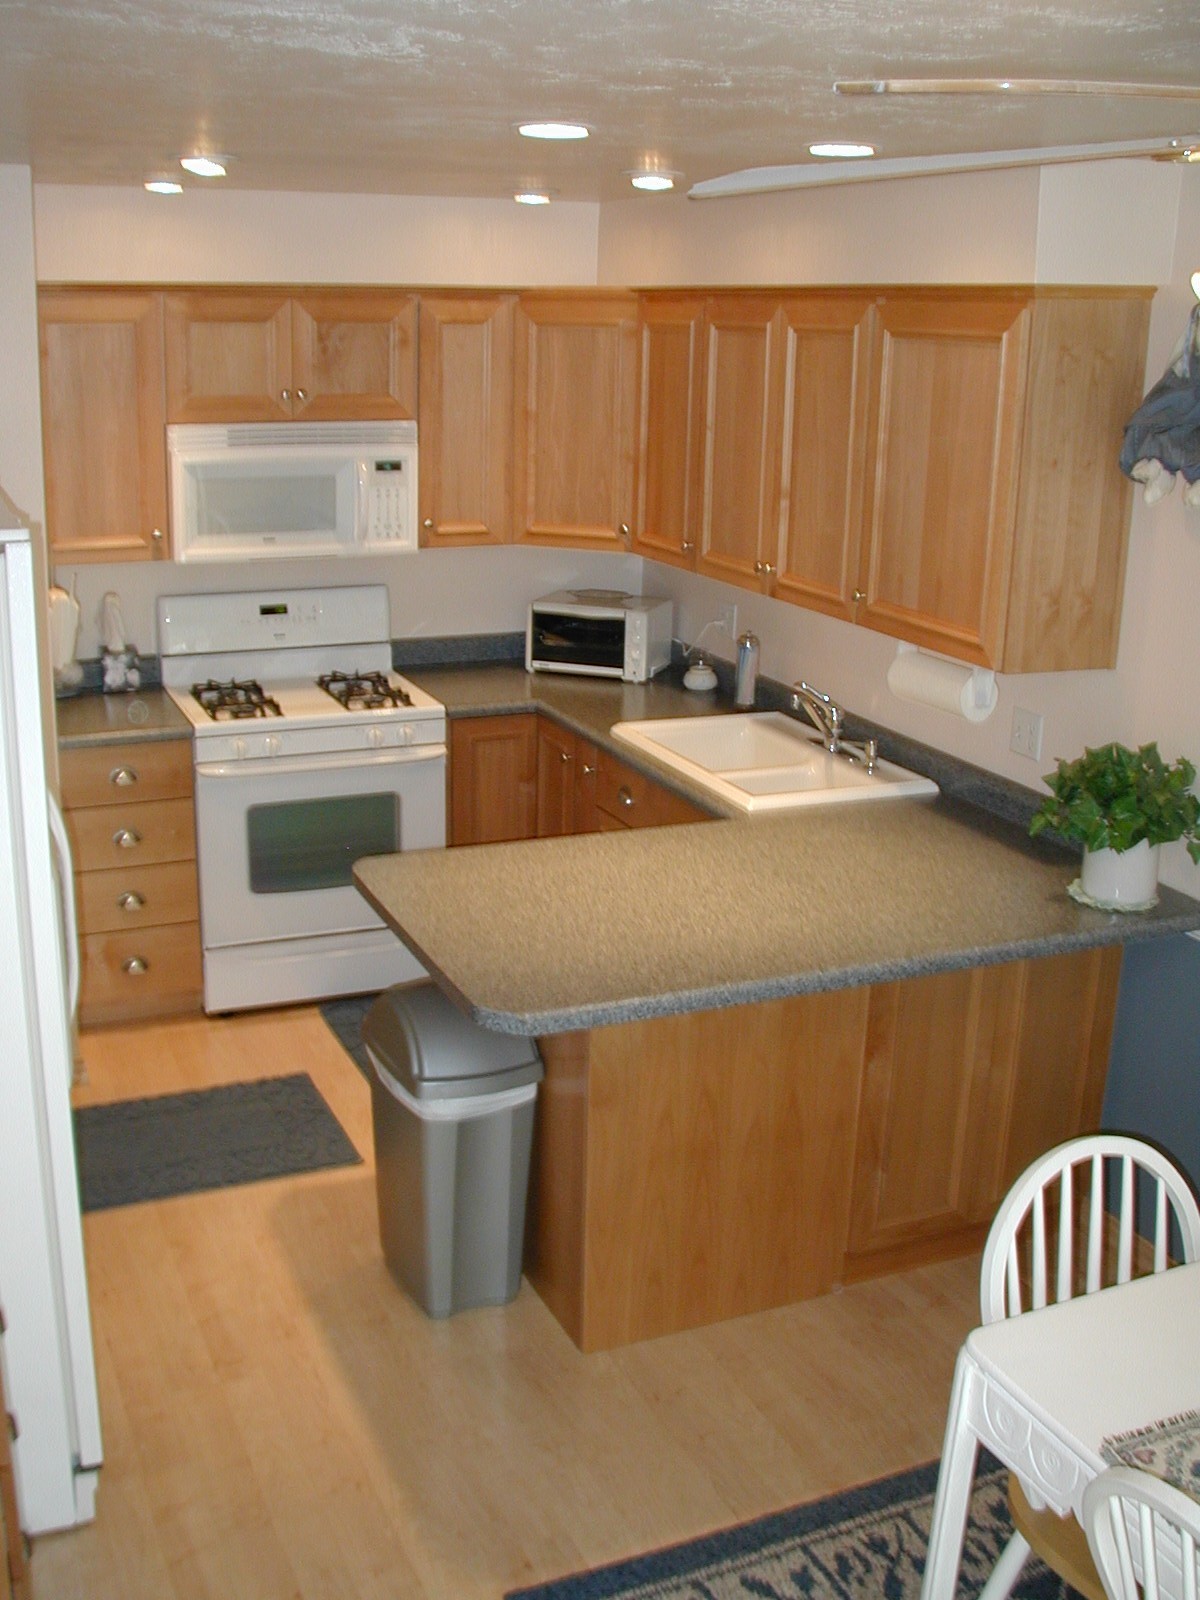 Adding an over-the-range microwave (countertop, washer, sink, appliance